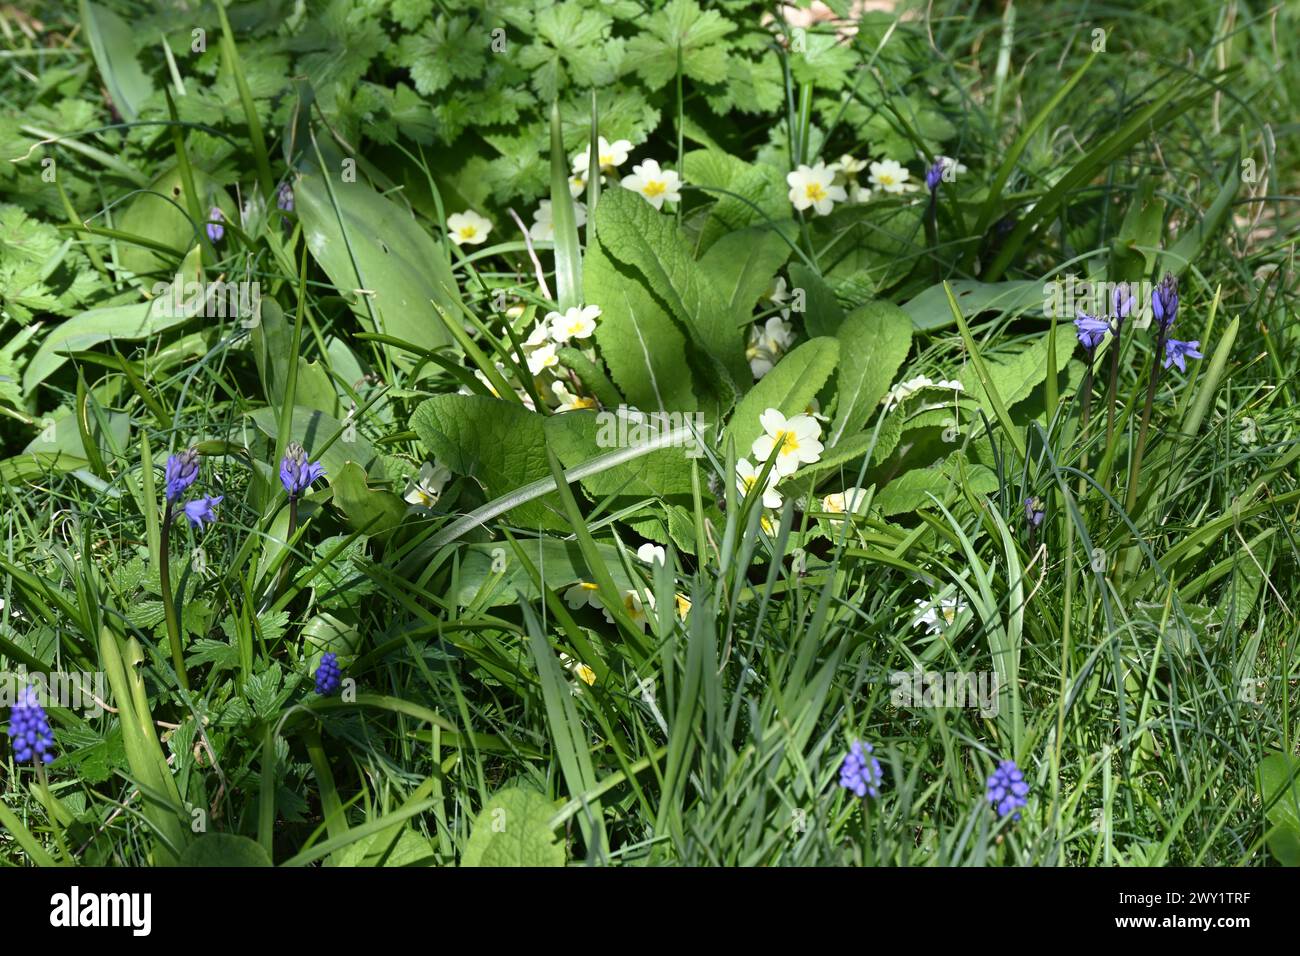 Wild primroses, Primula Vulgaris, and bluebells naturalised in grass in UK garden March Stock Photo